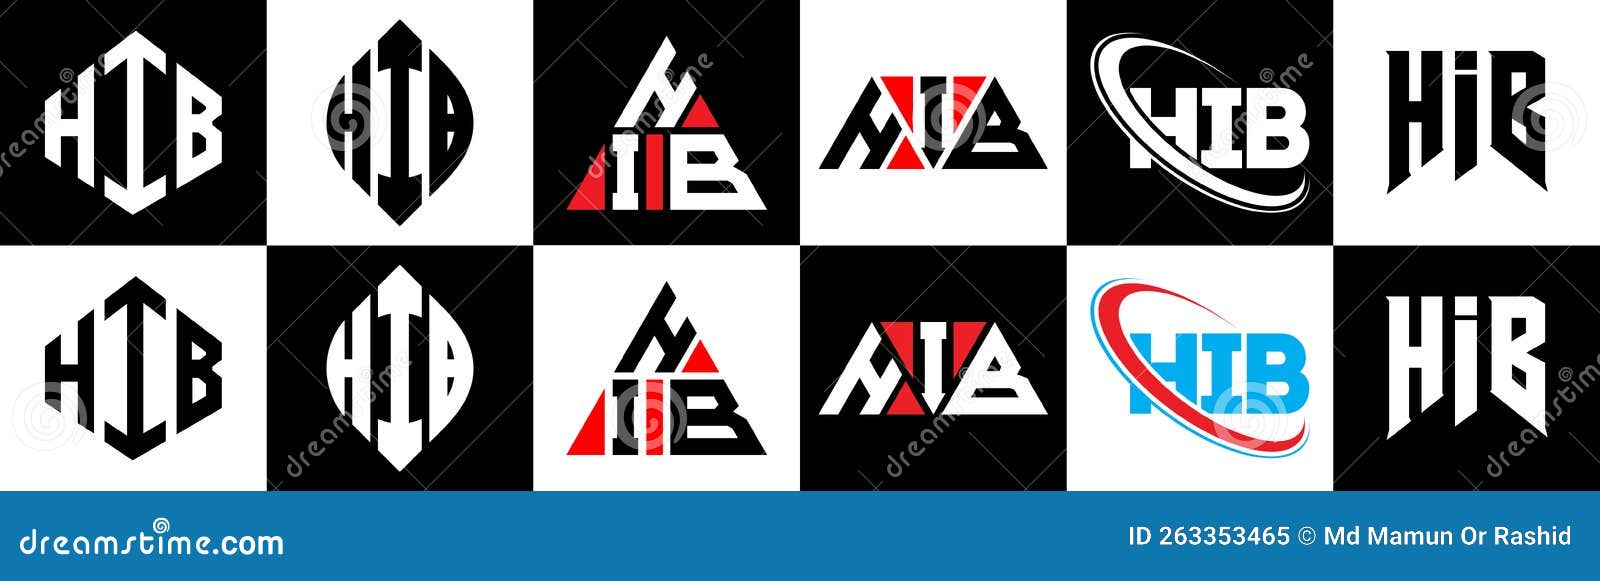 hib letter logo  in six style. hib polygon, circle, triangle, hexagon, flat and simple style with black and white color